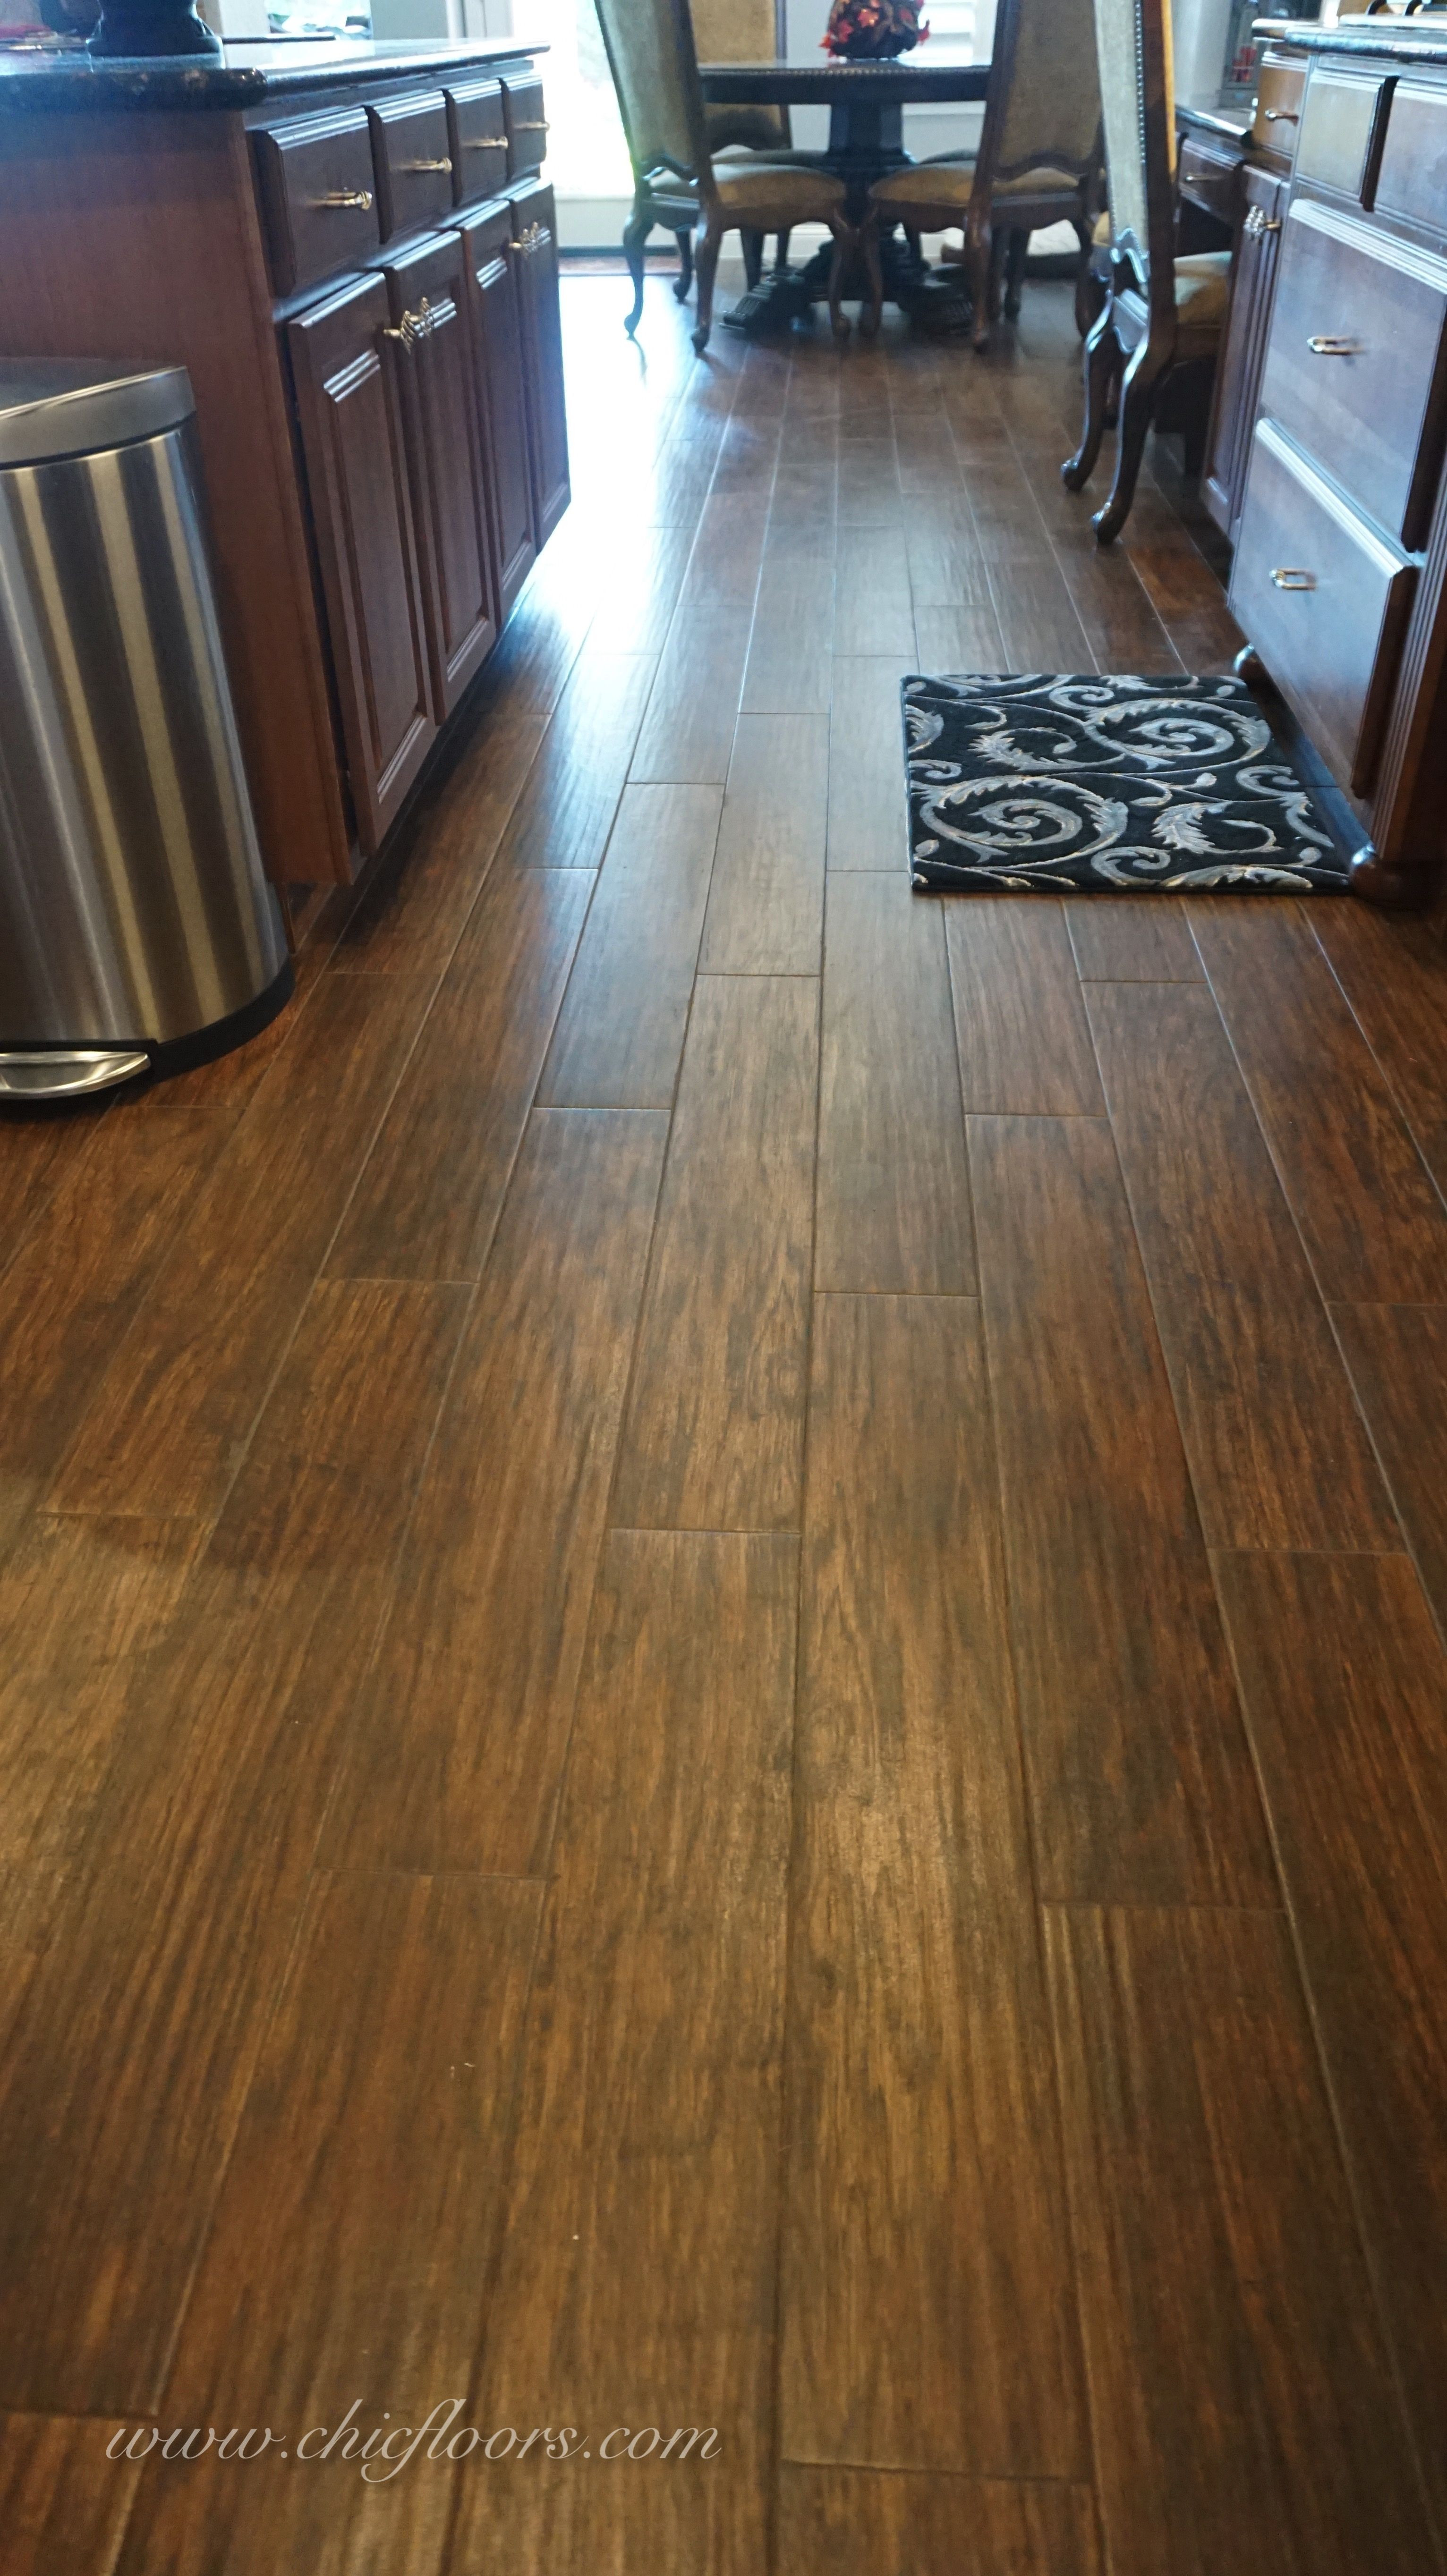 12 Fashionable Cleaning Shaw Engineered Hardwood Floors 2024 free download cleaning shaw engineered hardwood floors of shaw floors petrified hickory 6x36 porcelain tile in the color 700 regarding shaw floors petrified hickory 6x36 porcelain tile in the color 700 fo